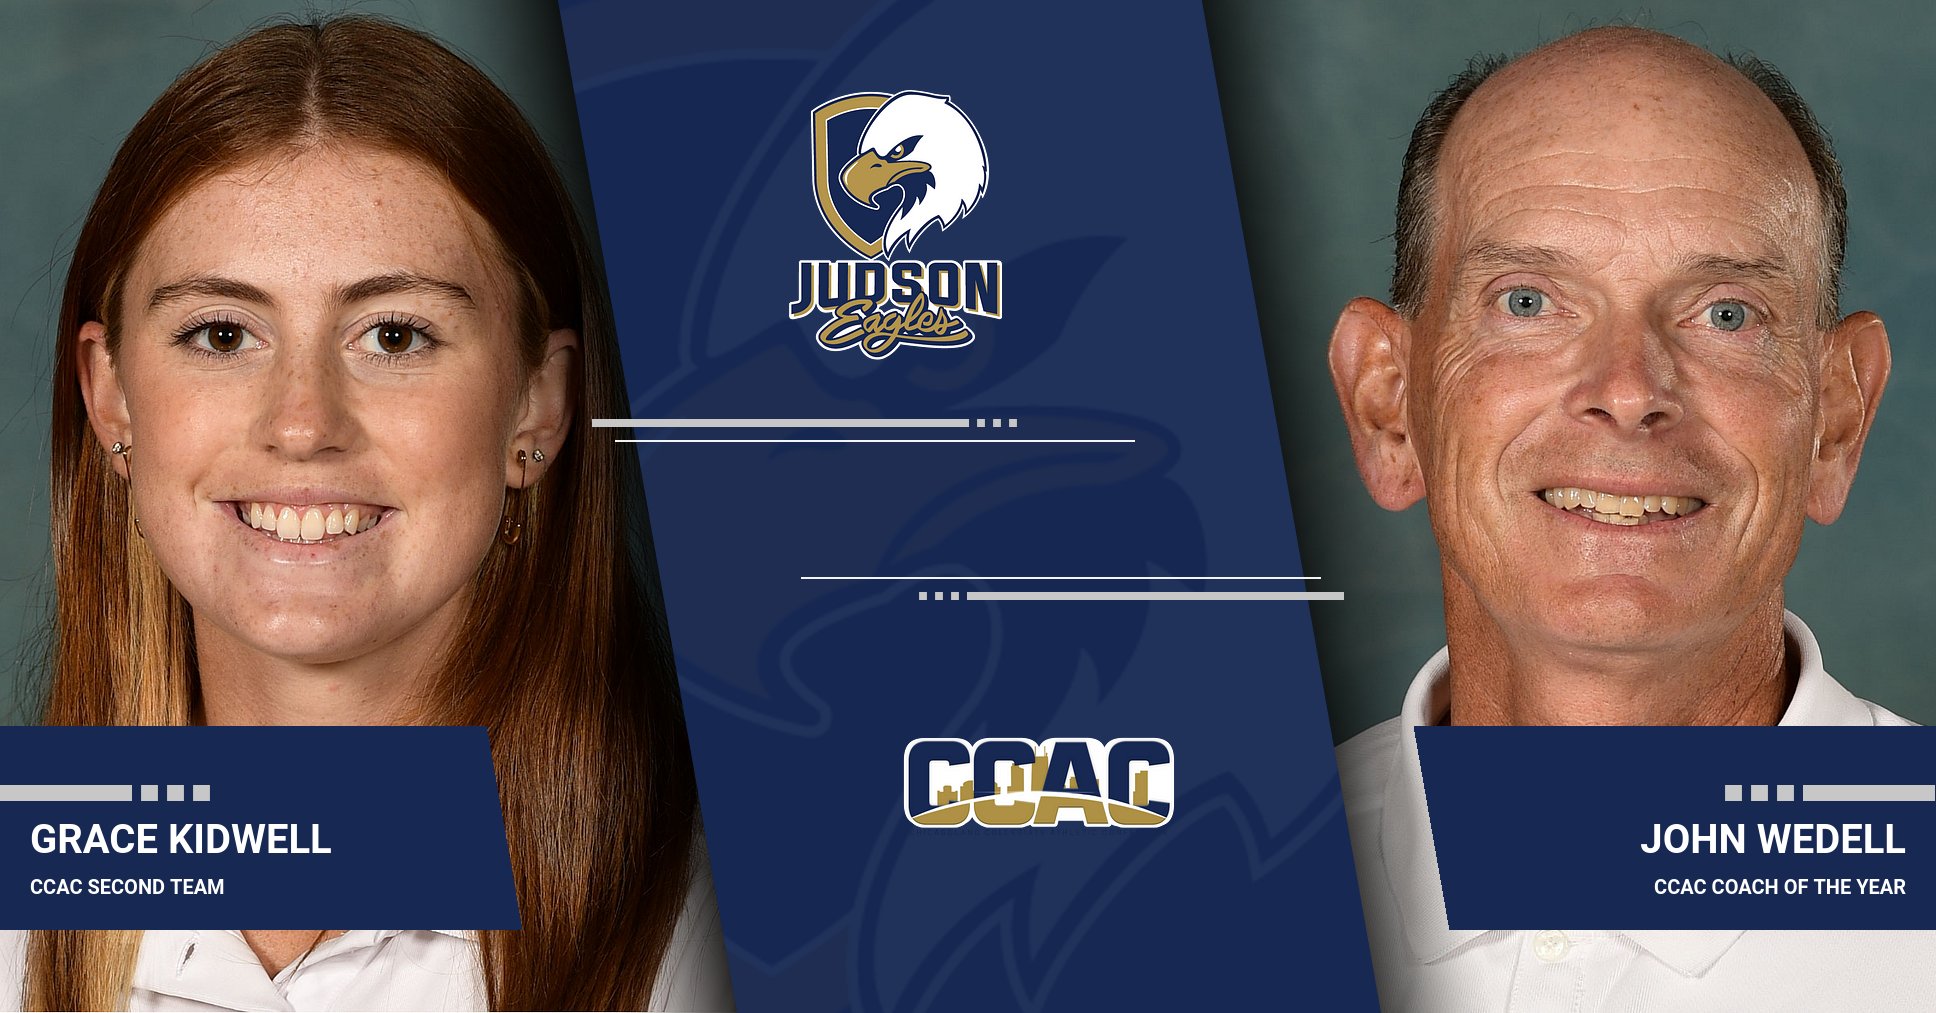 Wedell Named CCAC Coach of the Year, Kidwell Named to CCAC All-Conference Second Team